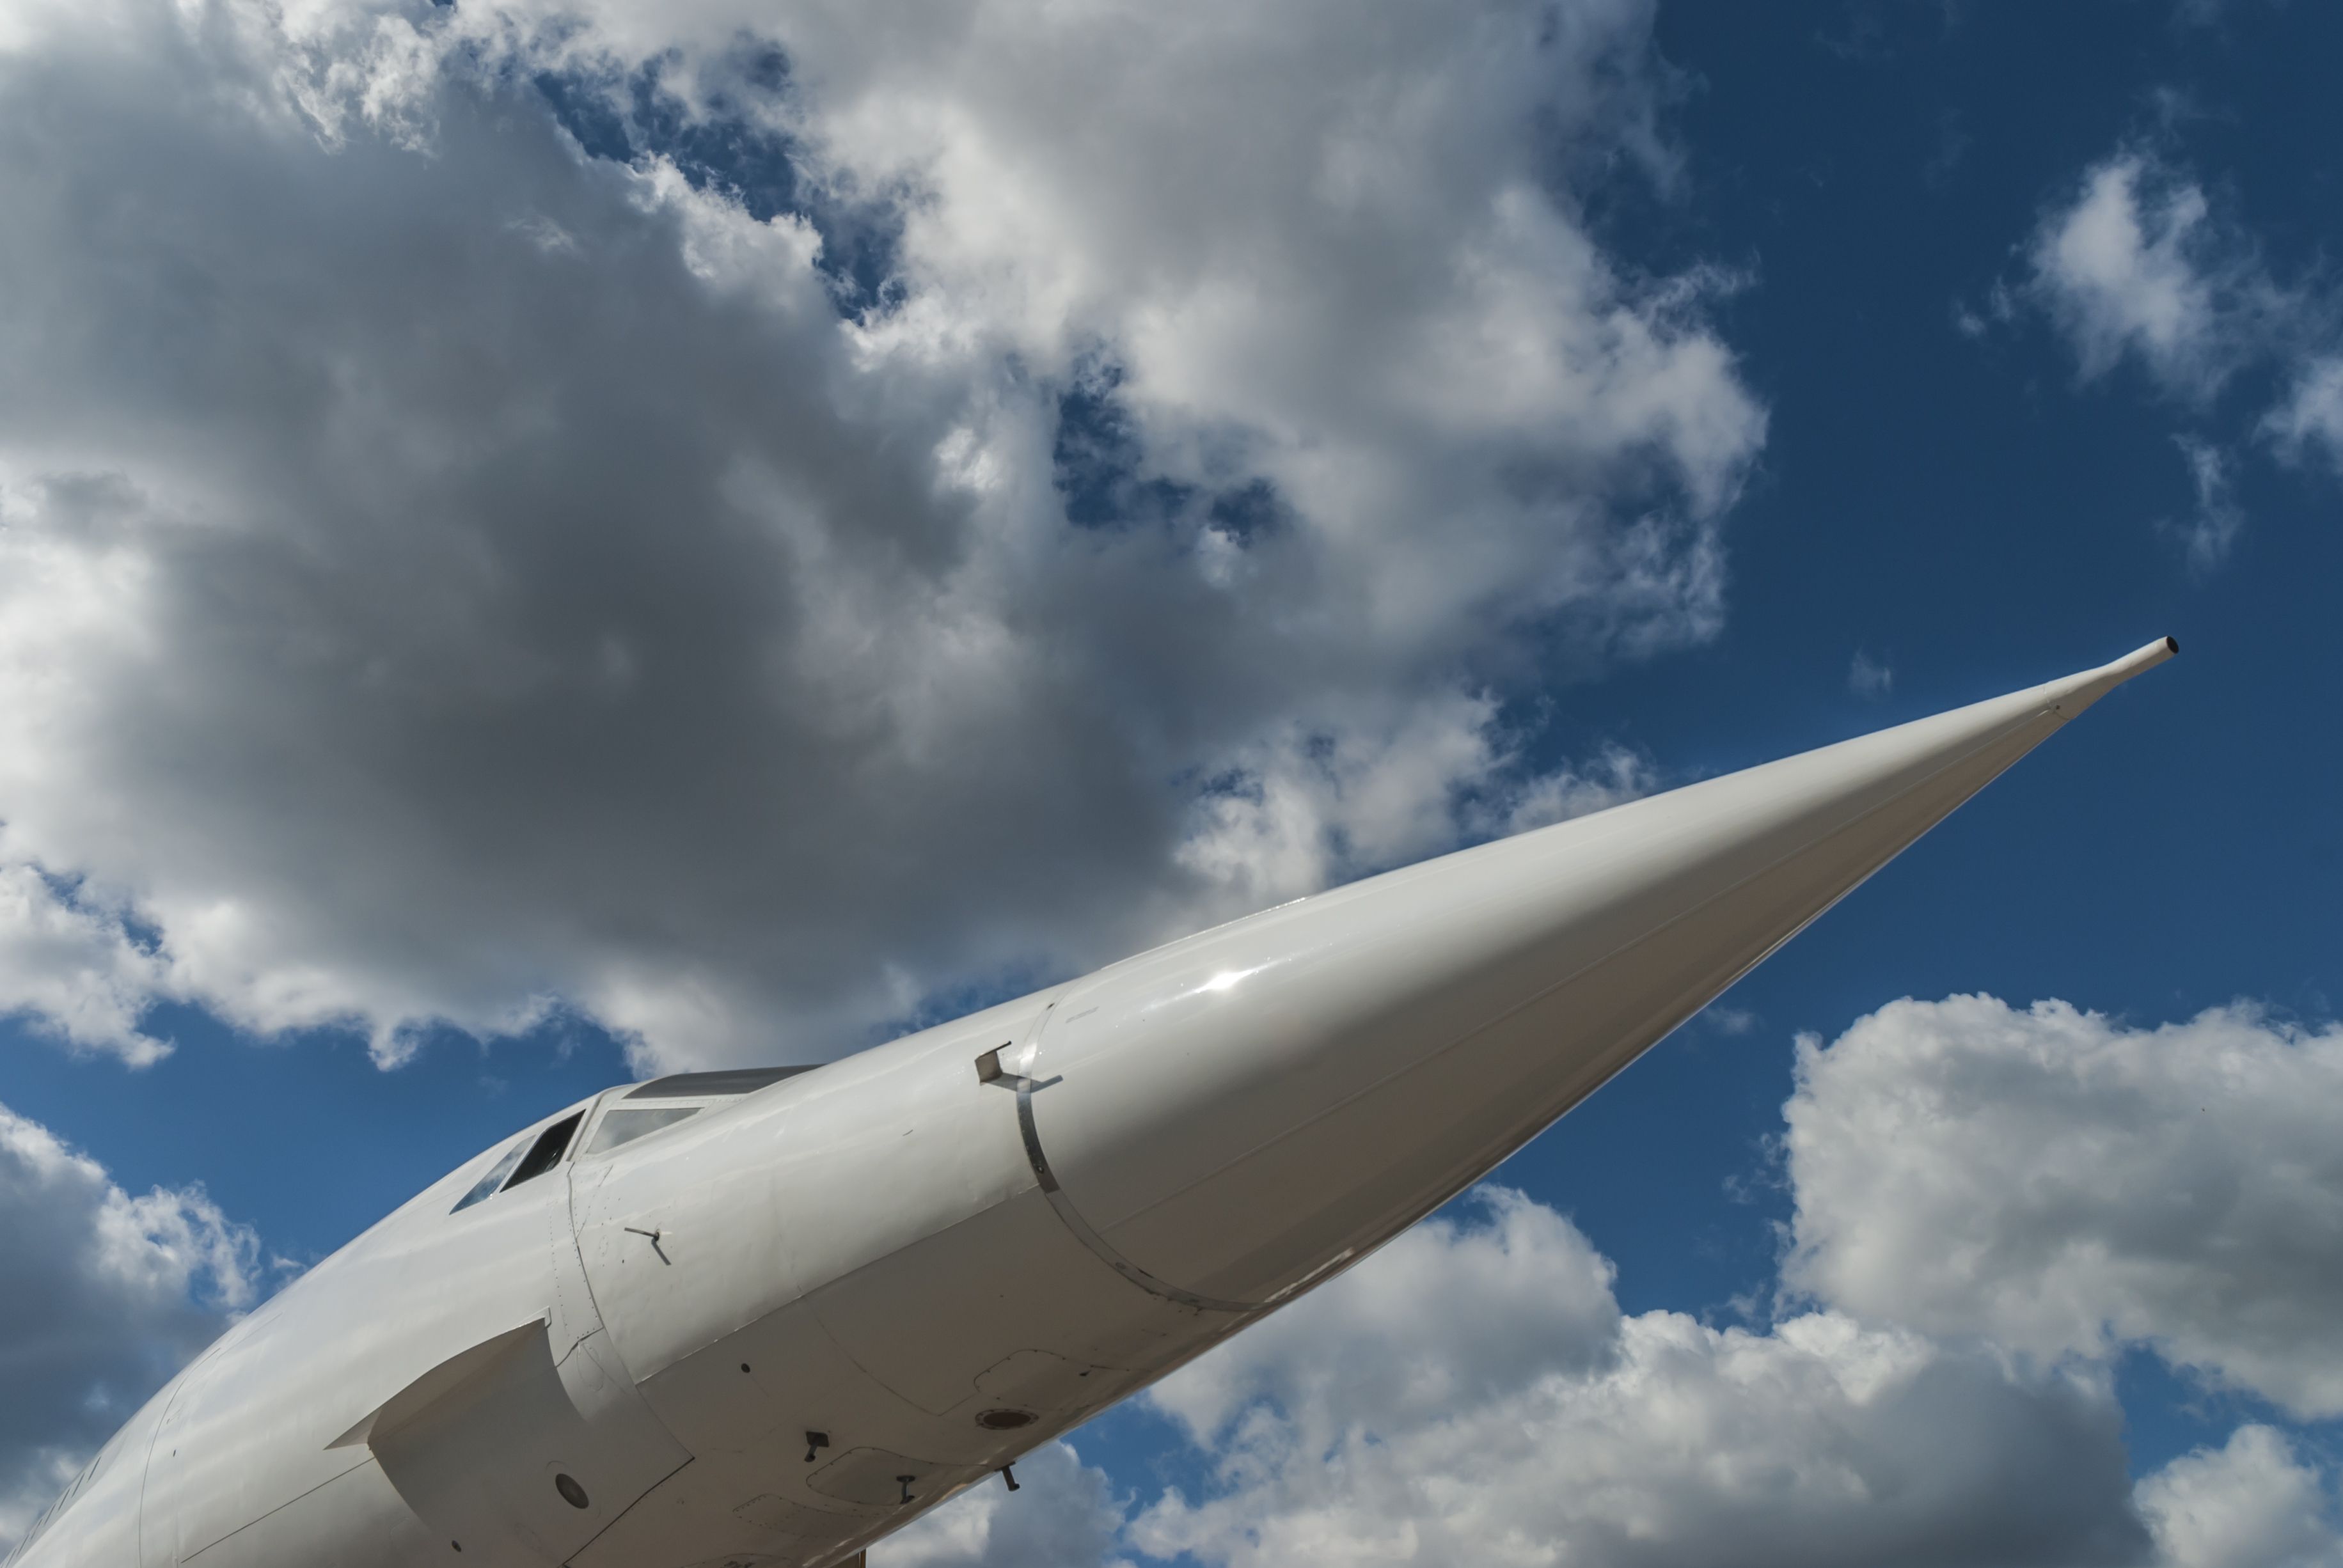 Pointed nose cone and windscreen of the supersonic aircraft Concorde